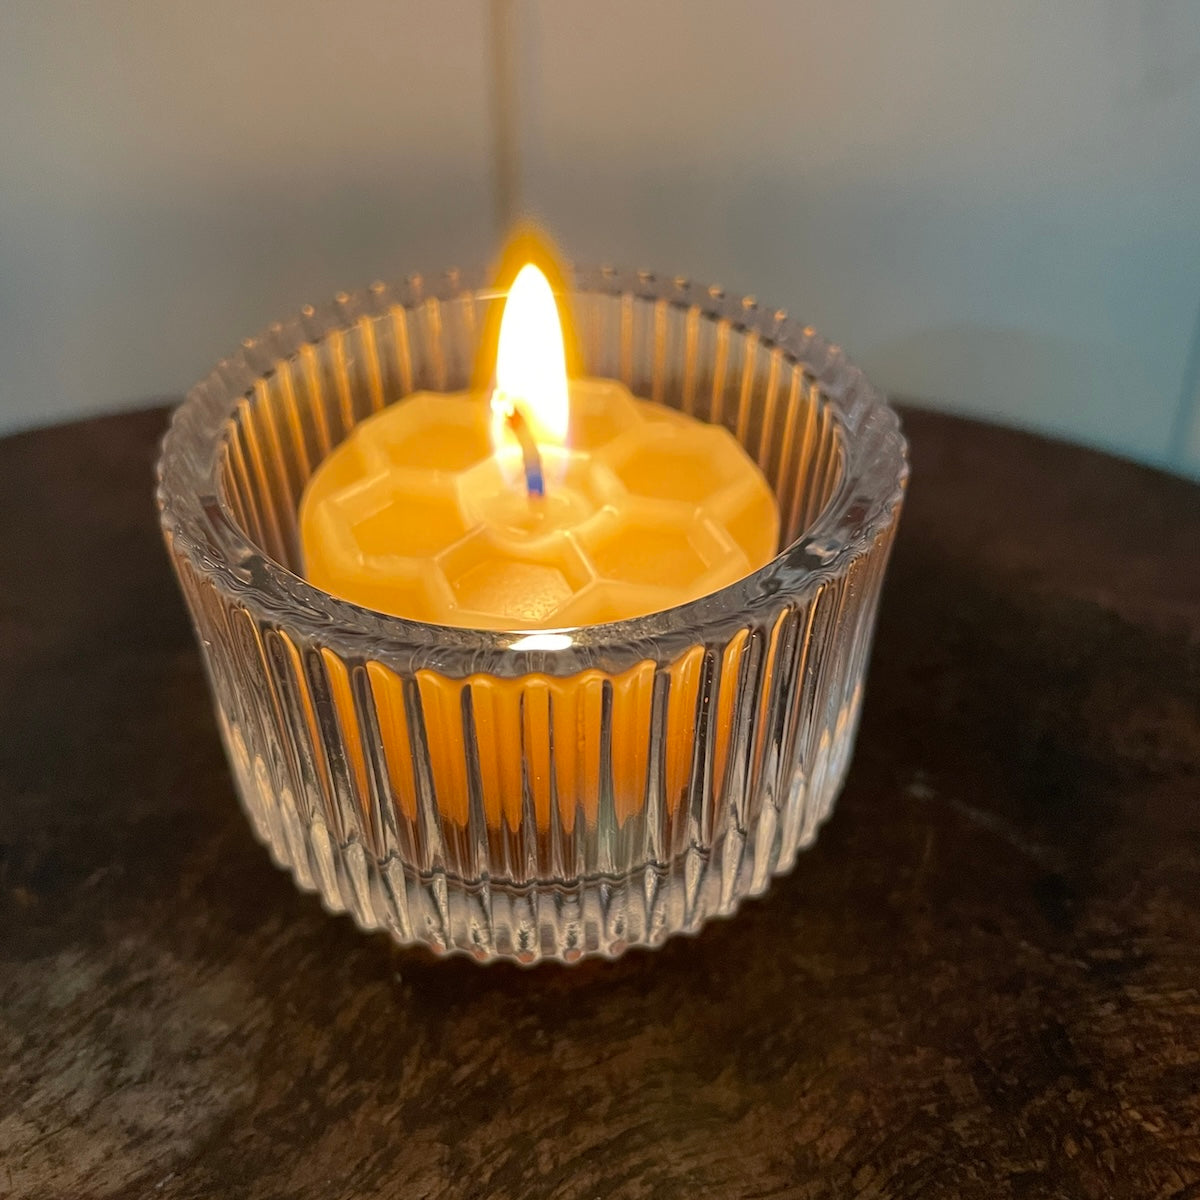 Honeycomb beeswax candle in ribbed glass holder by Happy Flame